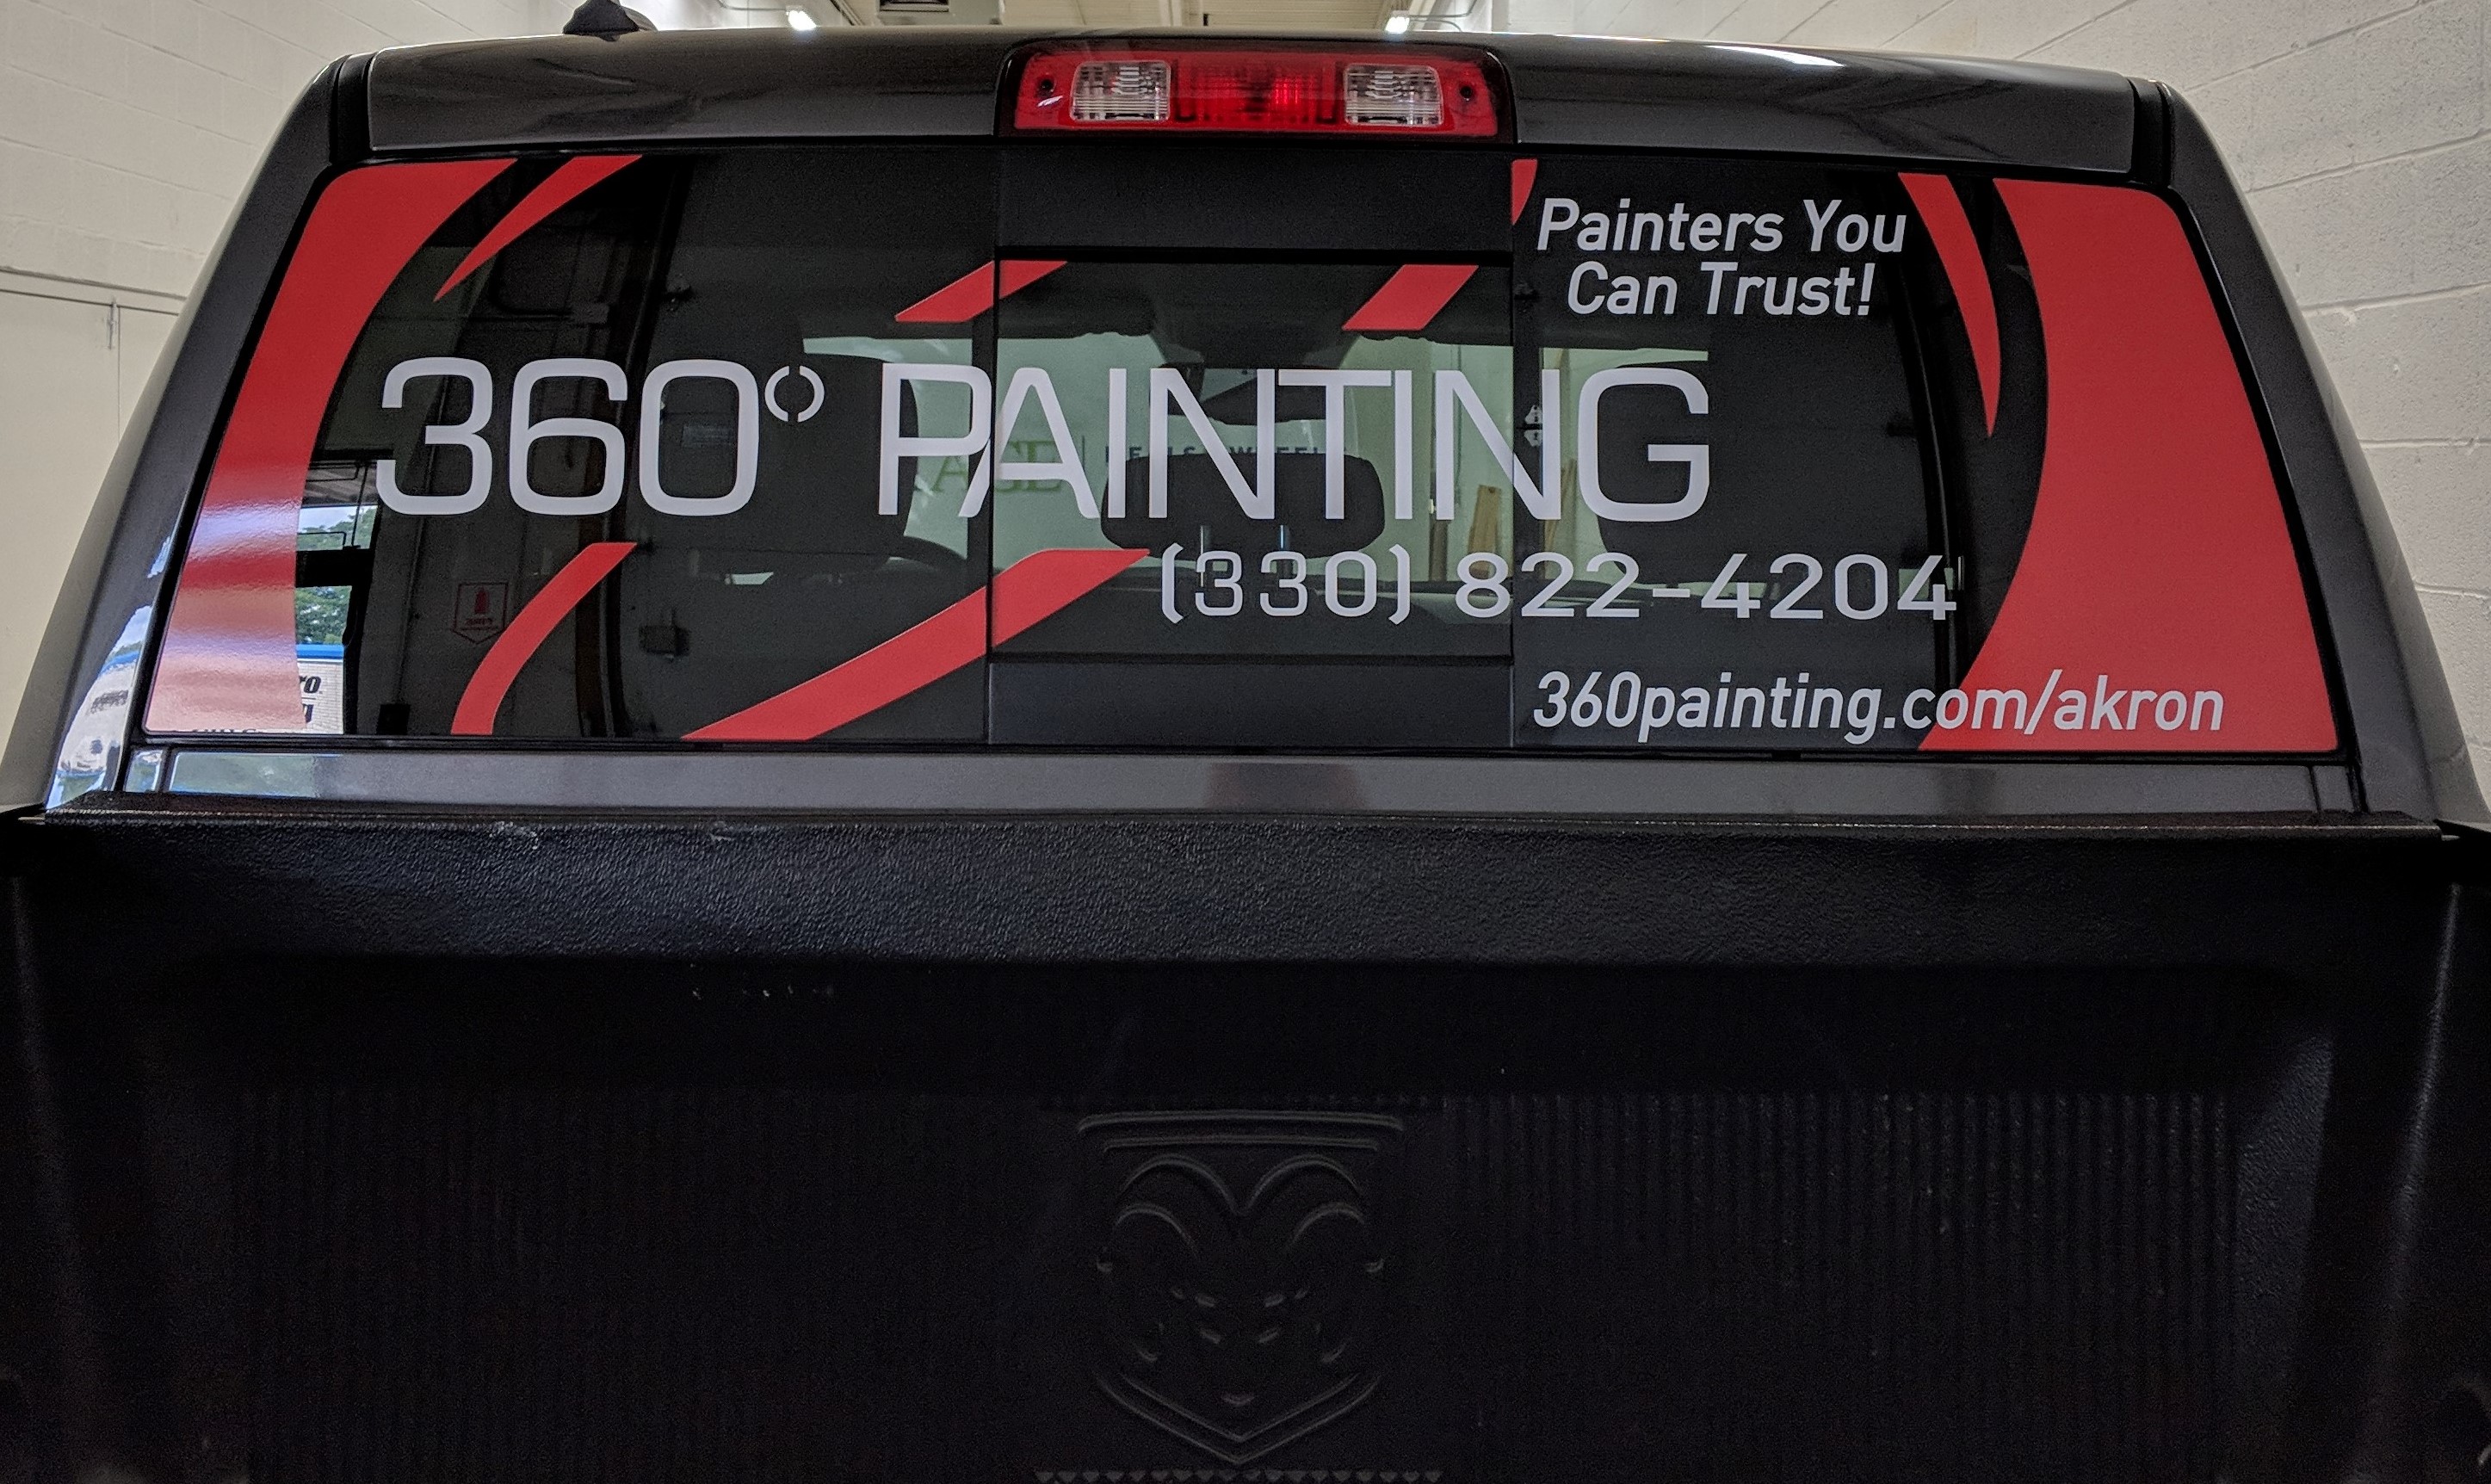 Vehicle rear window wrap for 360 Painting